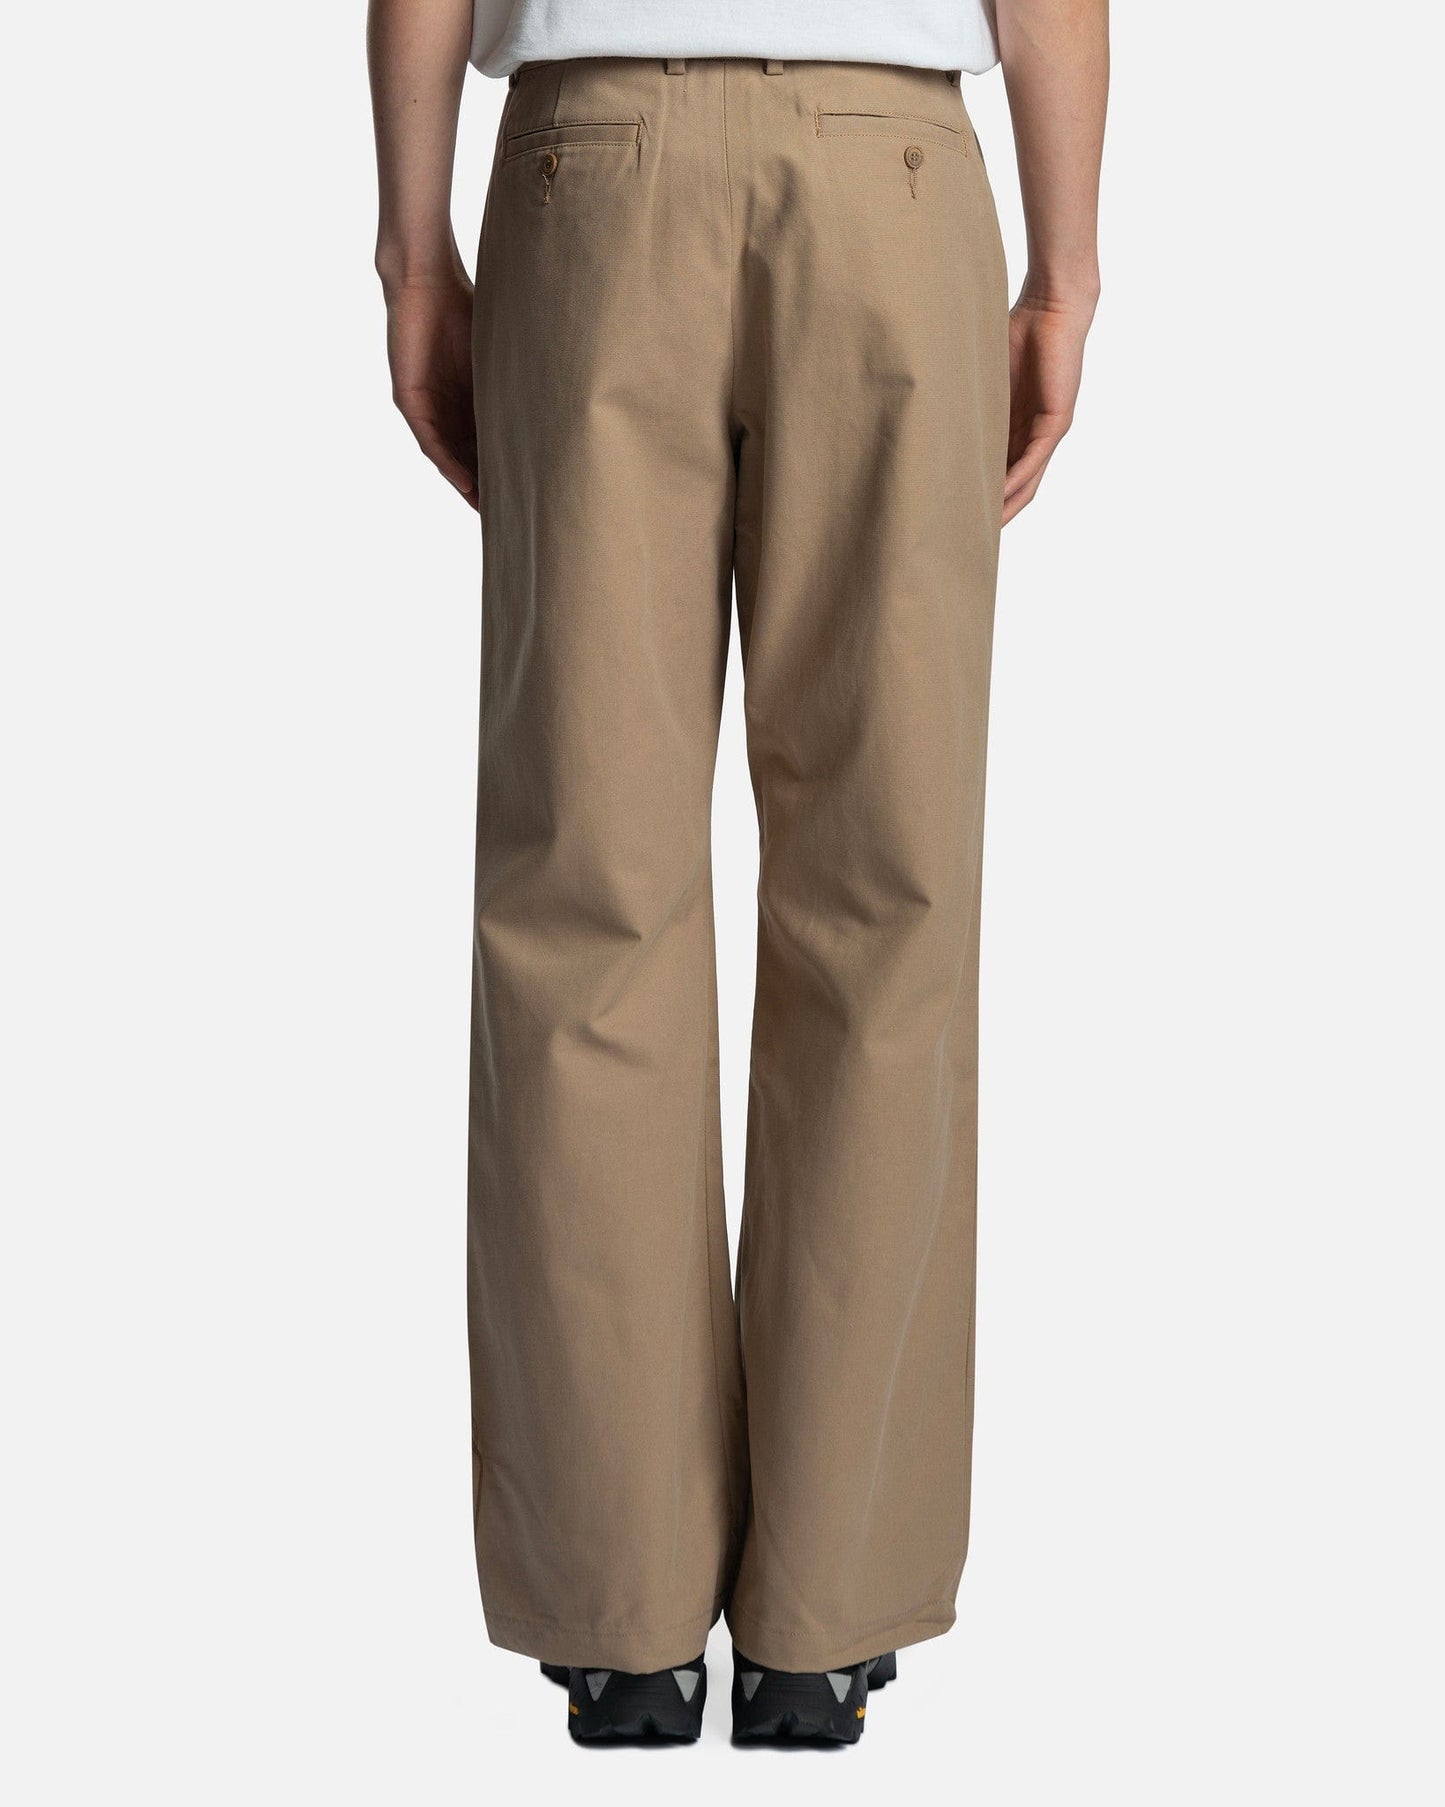 Reese Cooper Men's Pants Oat Grass Embroidered Pleated Pant in Khaki